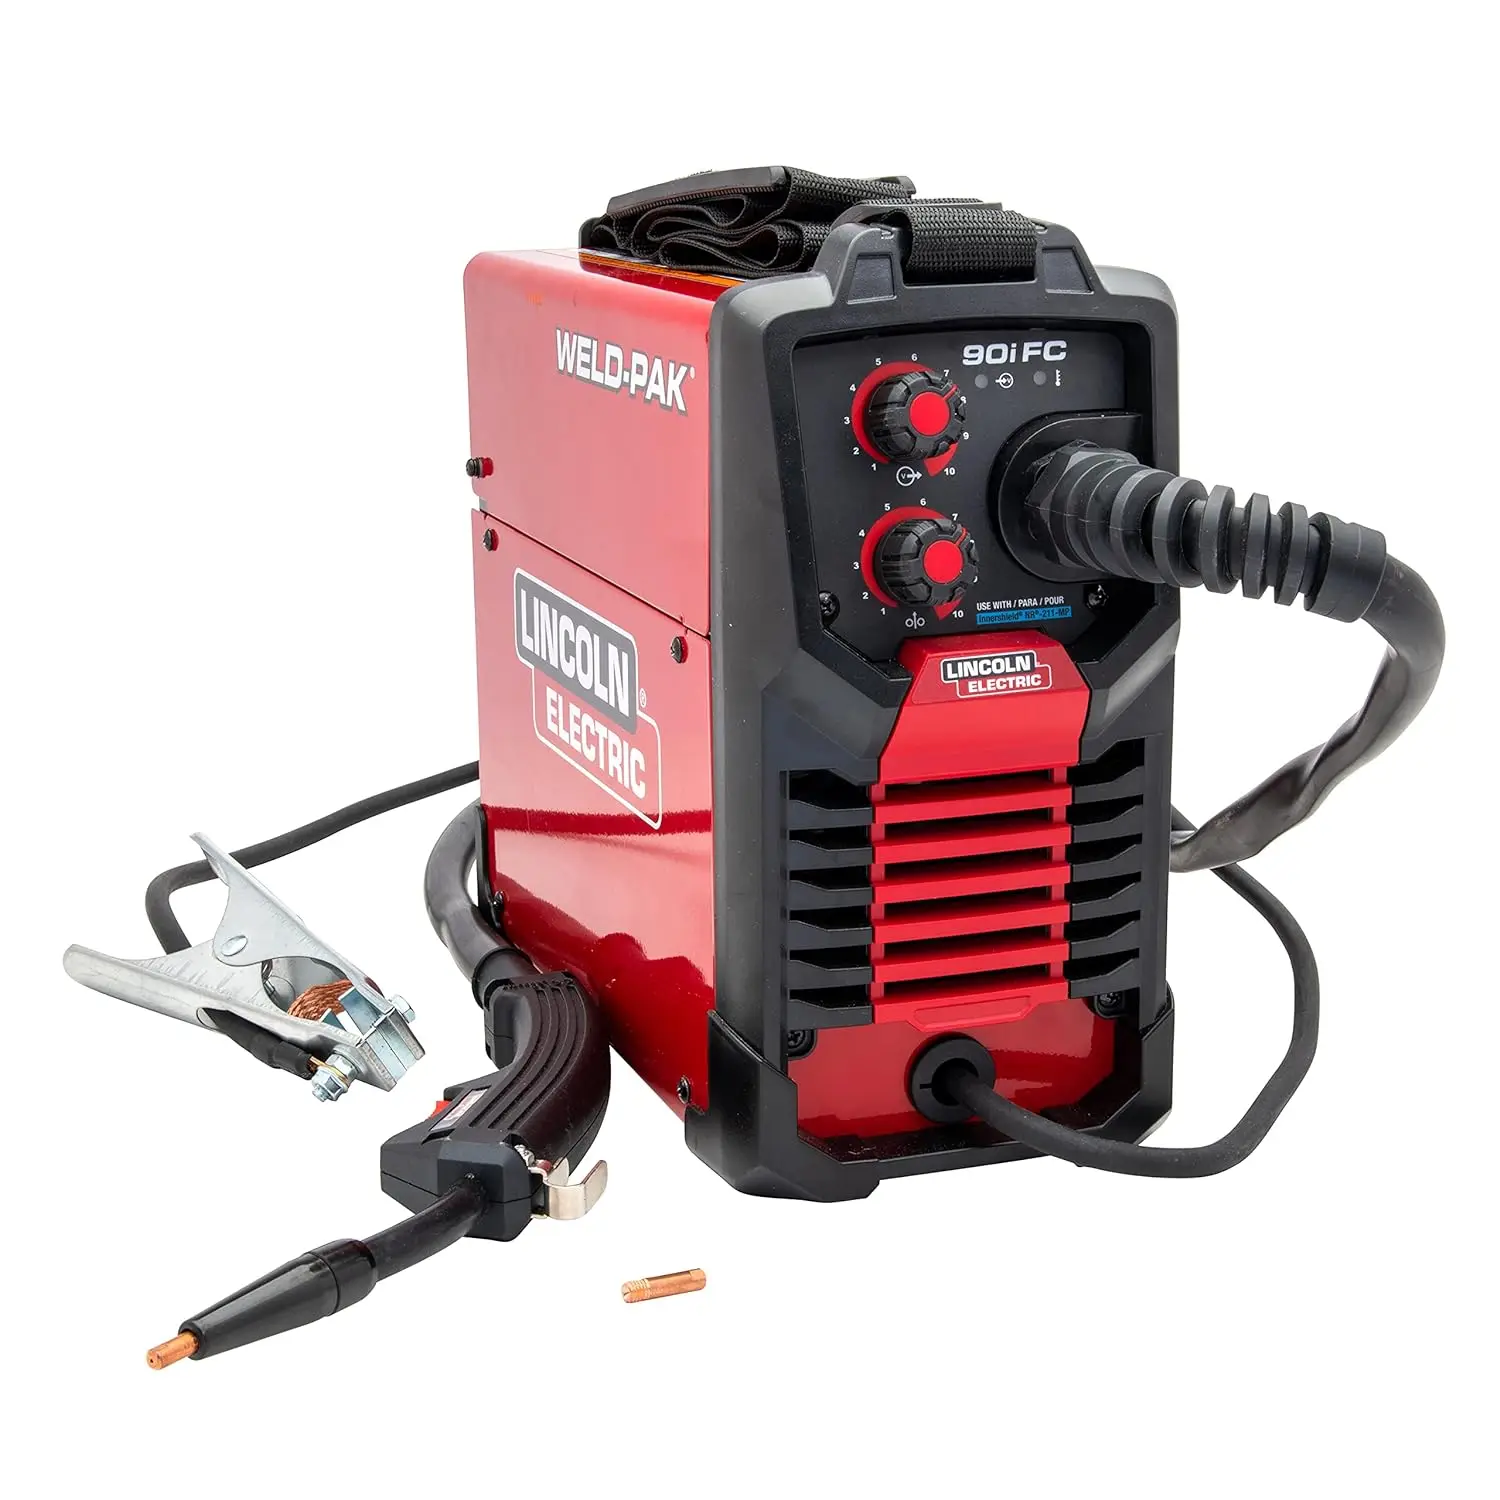 

Lincoln Electric 90i FC Flux Core Wire Feed Weld-PAK Welder, 120V Welding Machine, Portable w/Shoulder Strap, Protective Metal